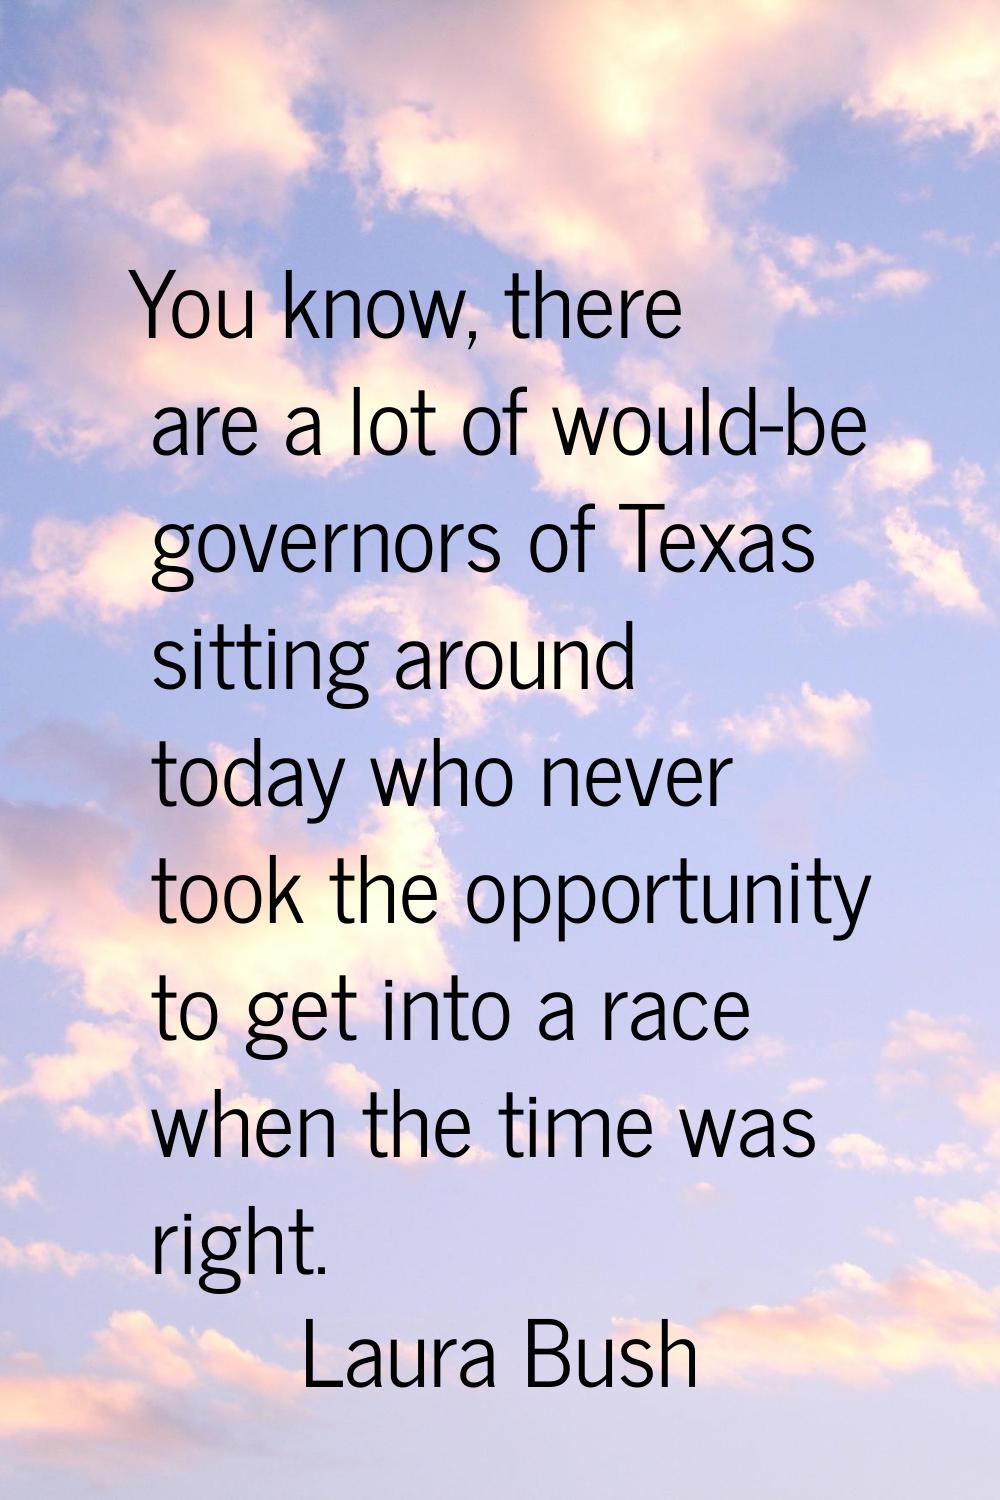 You know, there are a lot of would-be governors of Texas sitting around today who never took the op